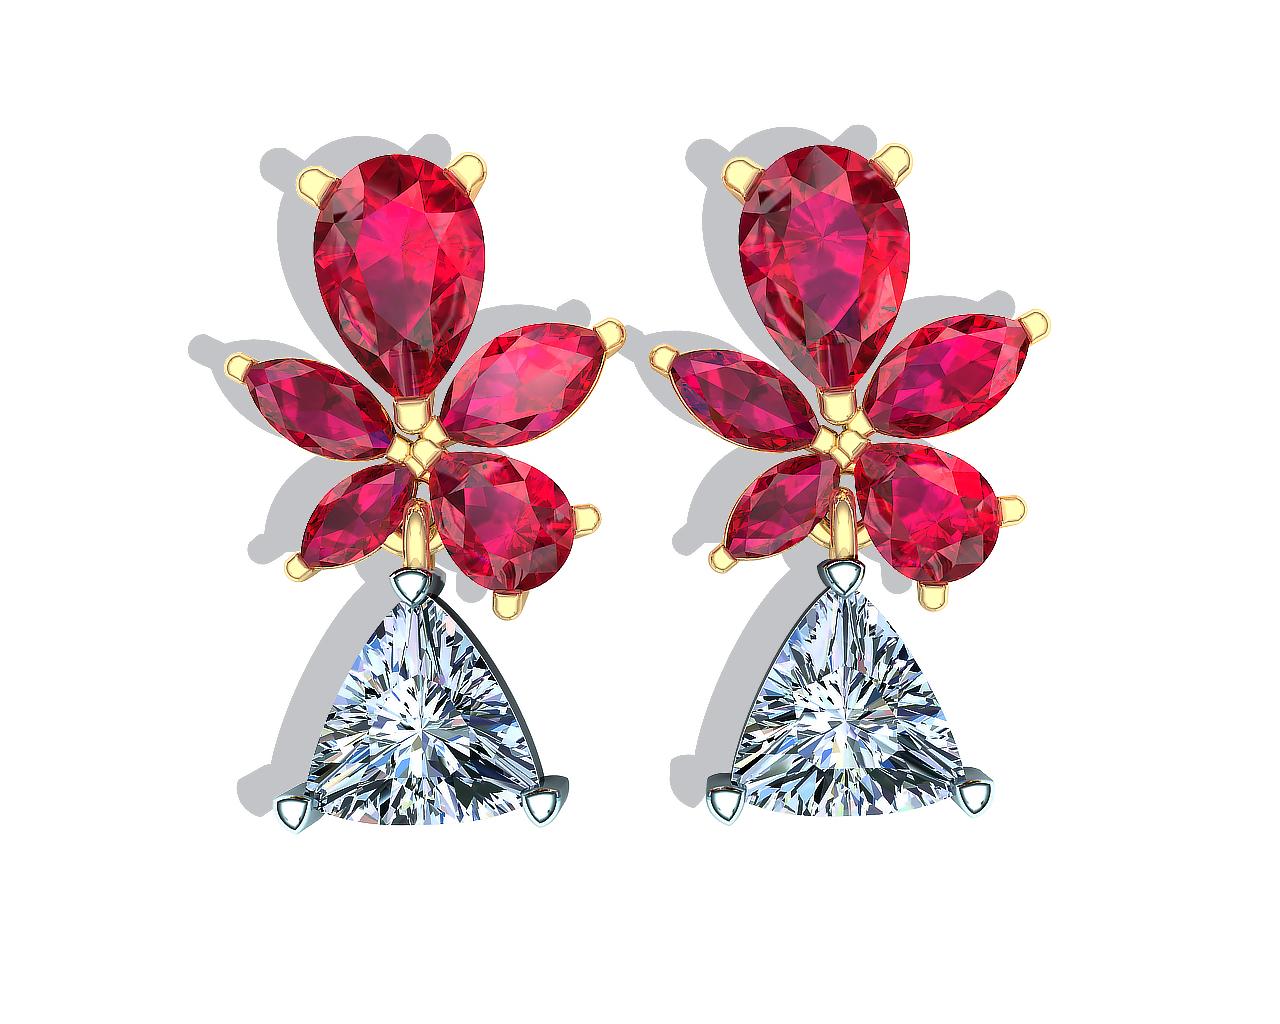 A proven design that shows the stunning contrast of rich ruby red set in yellow gold net to a cold crisp white diamond is seen in this pair of drop earrings. The center stone of each earring measures approx. 5mm and has a carat weight of close to